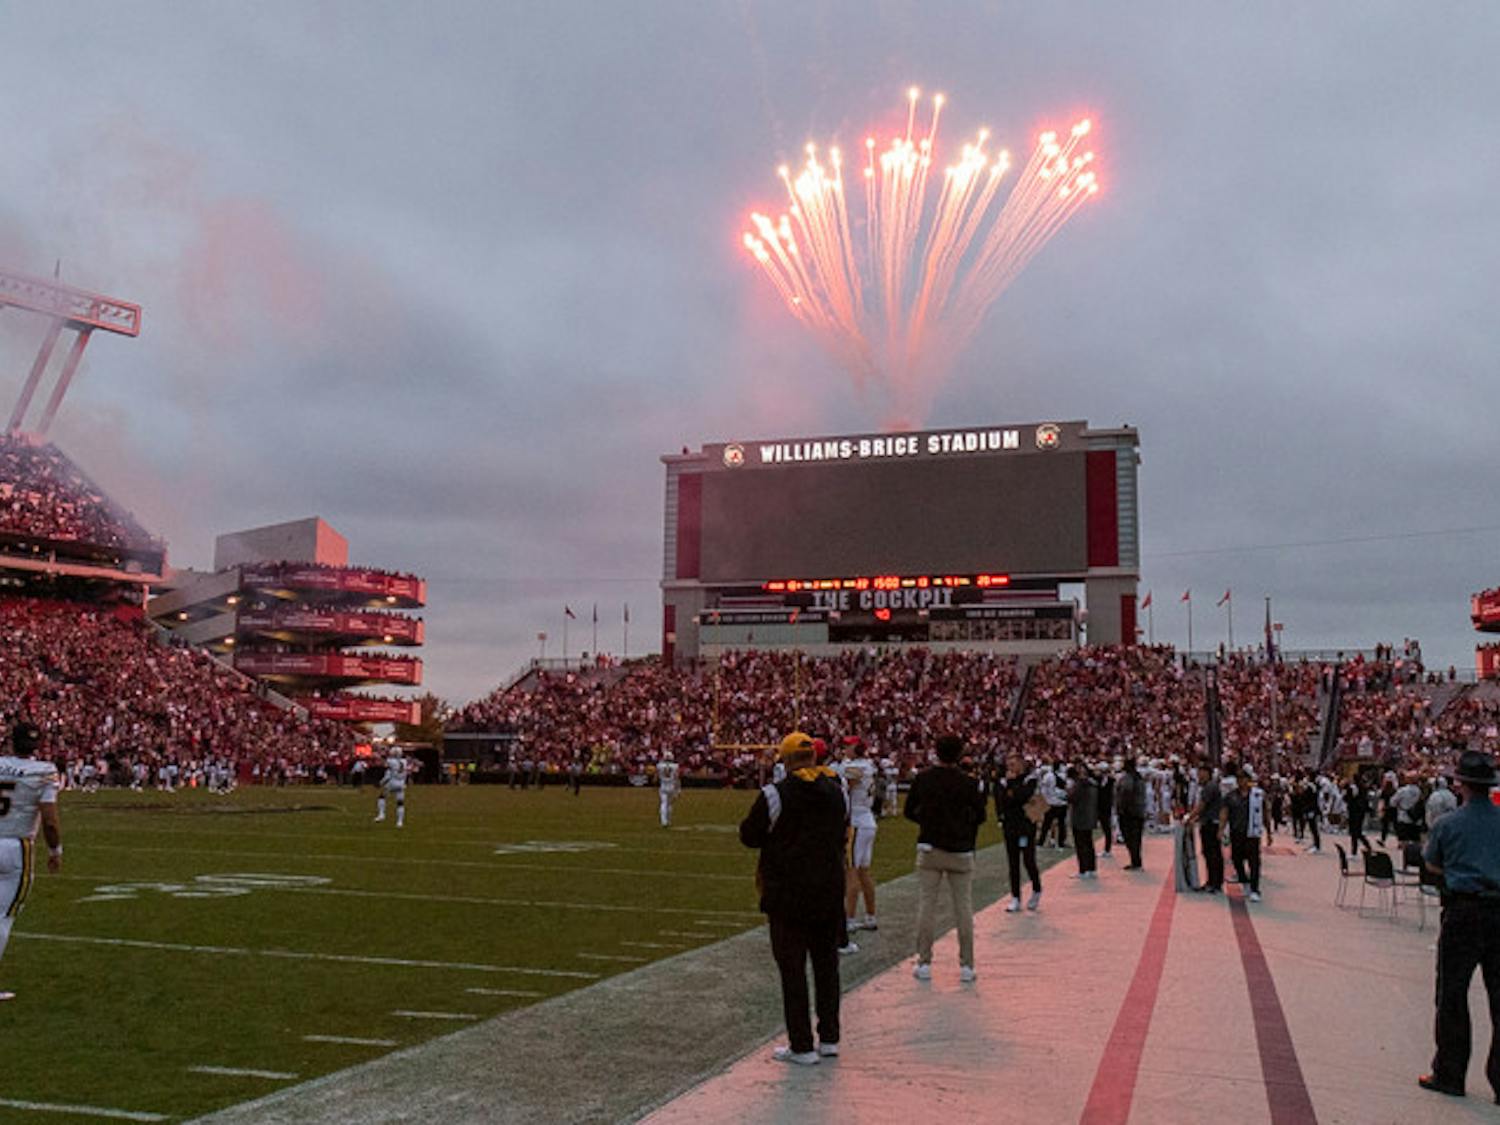 Fireworks shoot over the jumbotron at Williams-Brice Stadium prior to Sandstorm playing during the matchup between South Carolina and Missouri on Oct. 29, 2022. The song plays prior to every kickoff, getting Gamecock fans hyped up for the next possession.&nbsp;